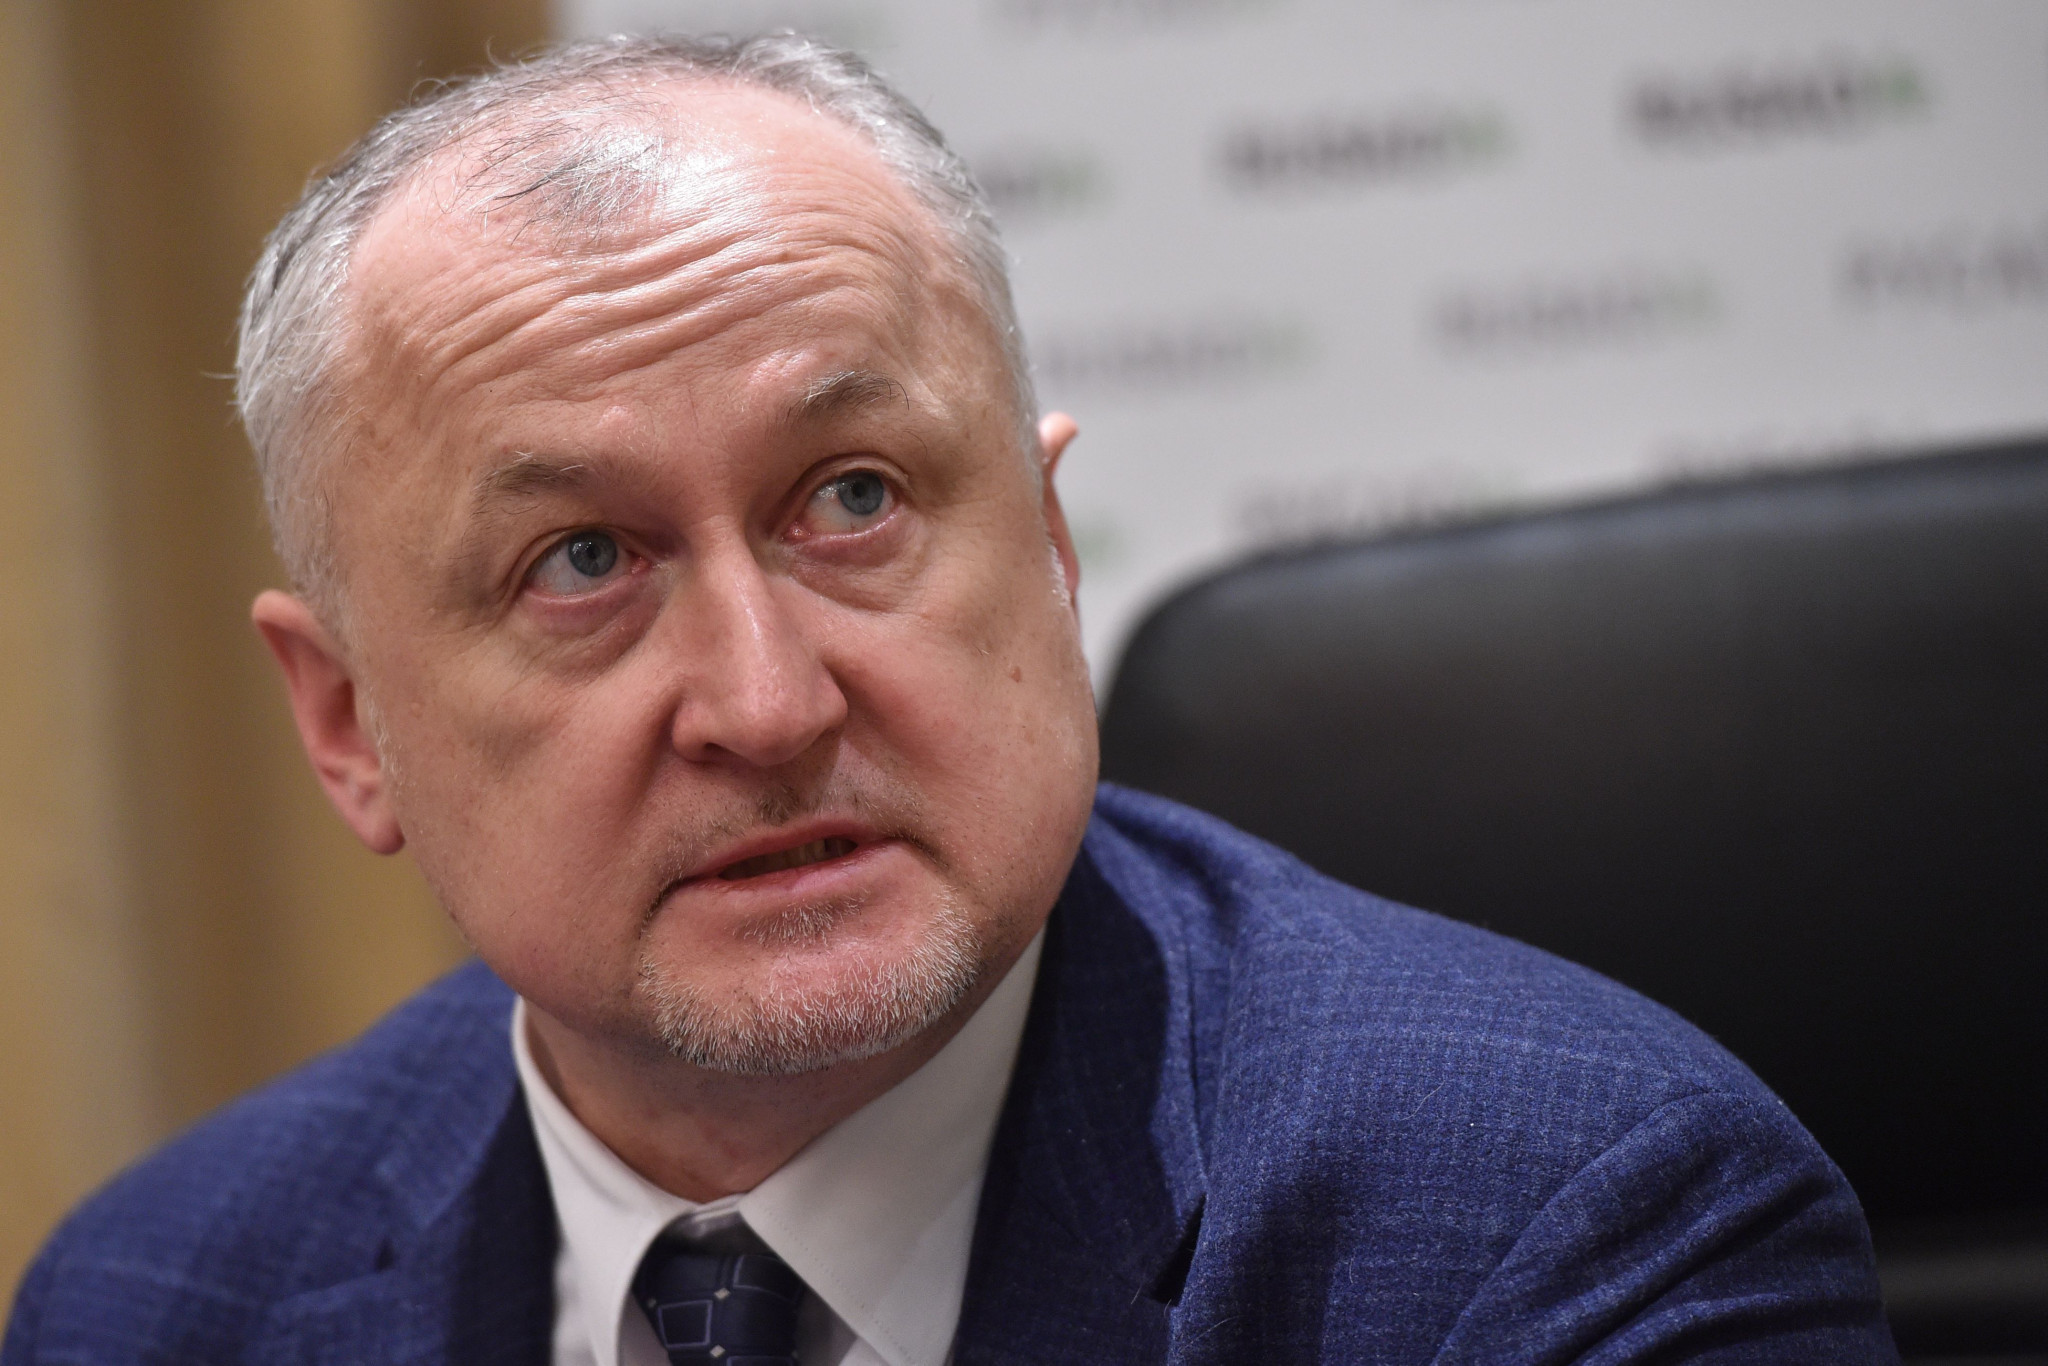 RUSADA director general warns Russian sport heading into "abyss" after data tampering claims